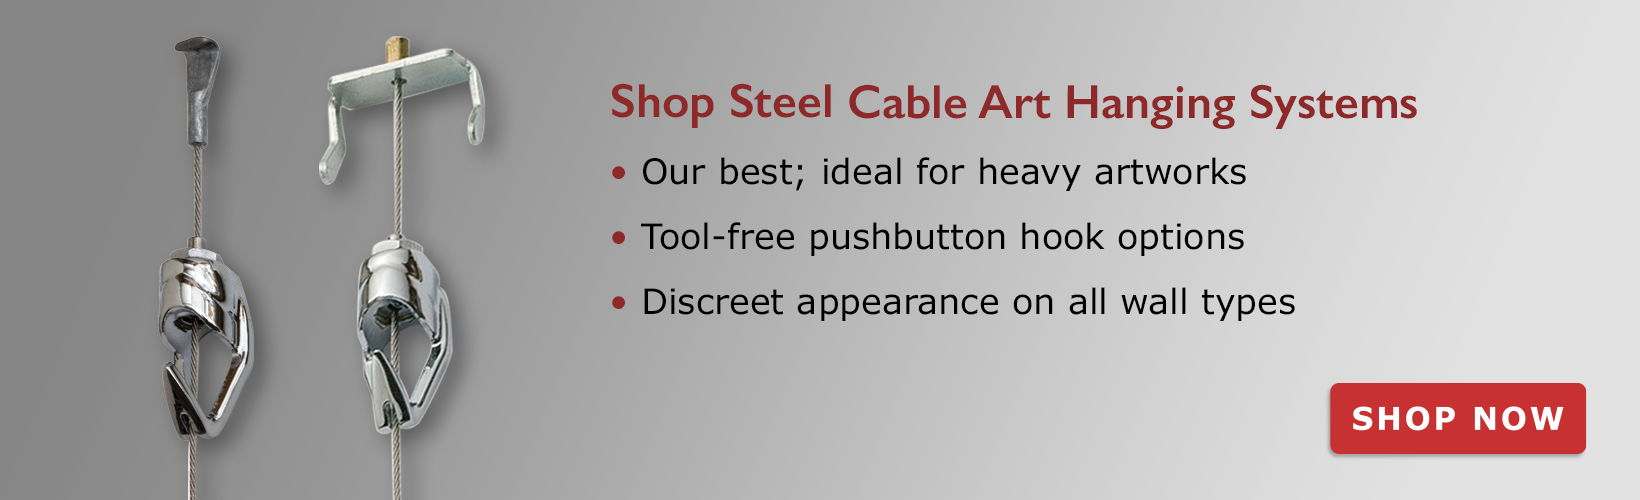 Steel Cable Art Hanging System for Art Galleries